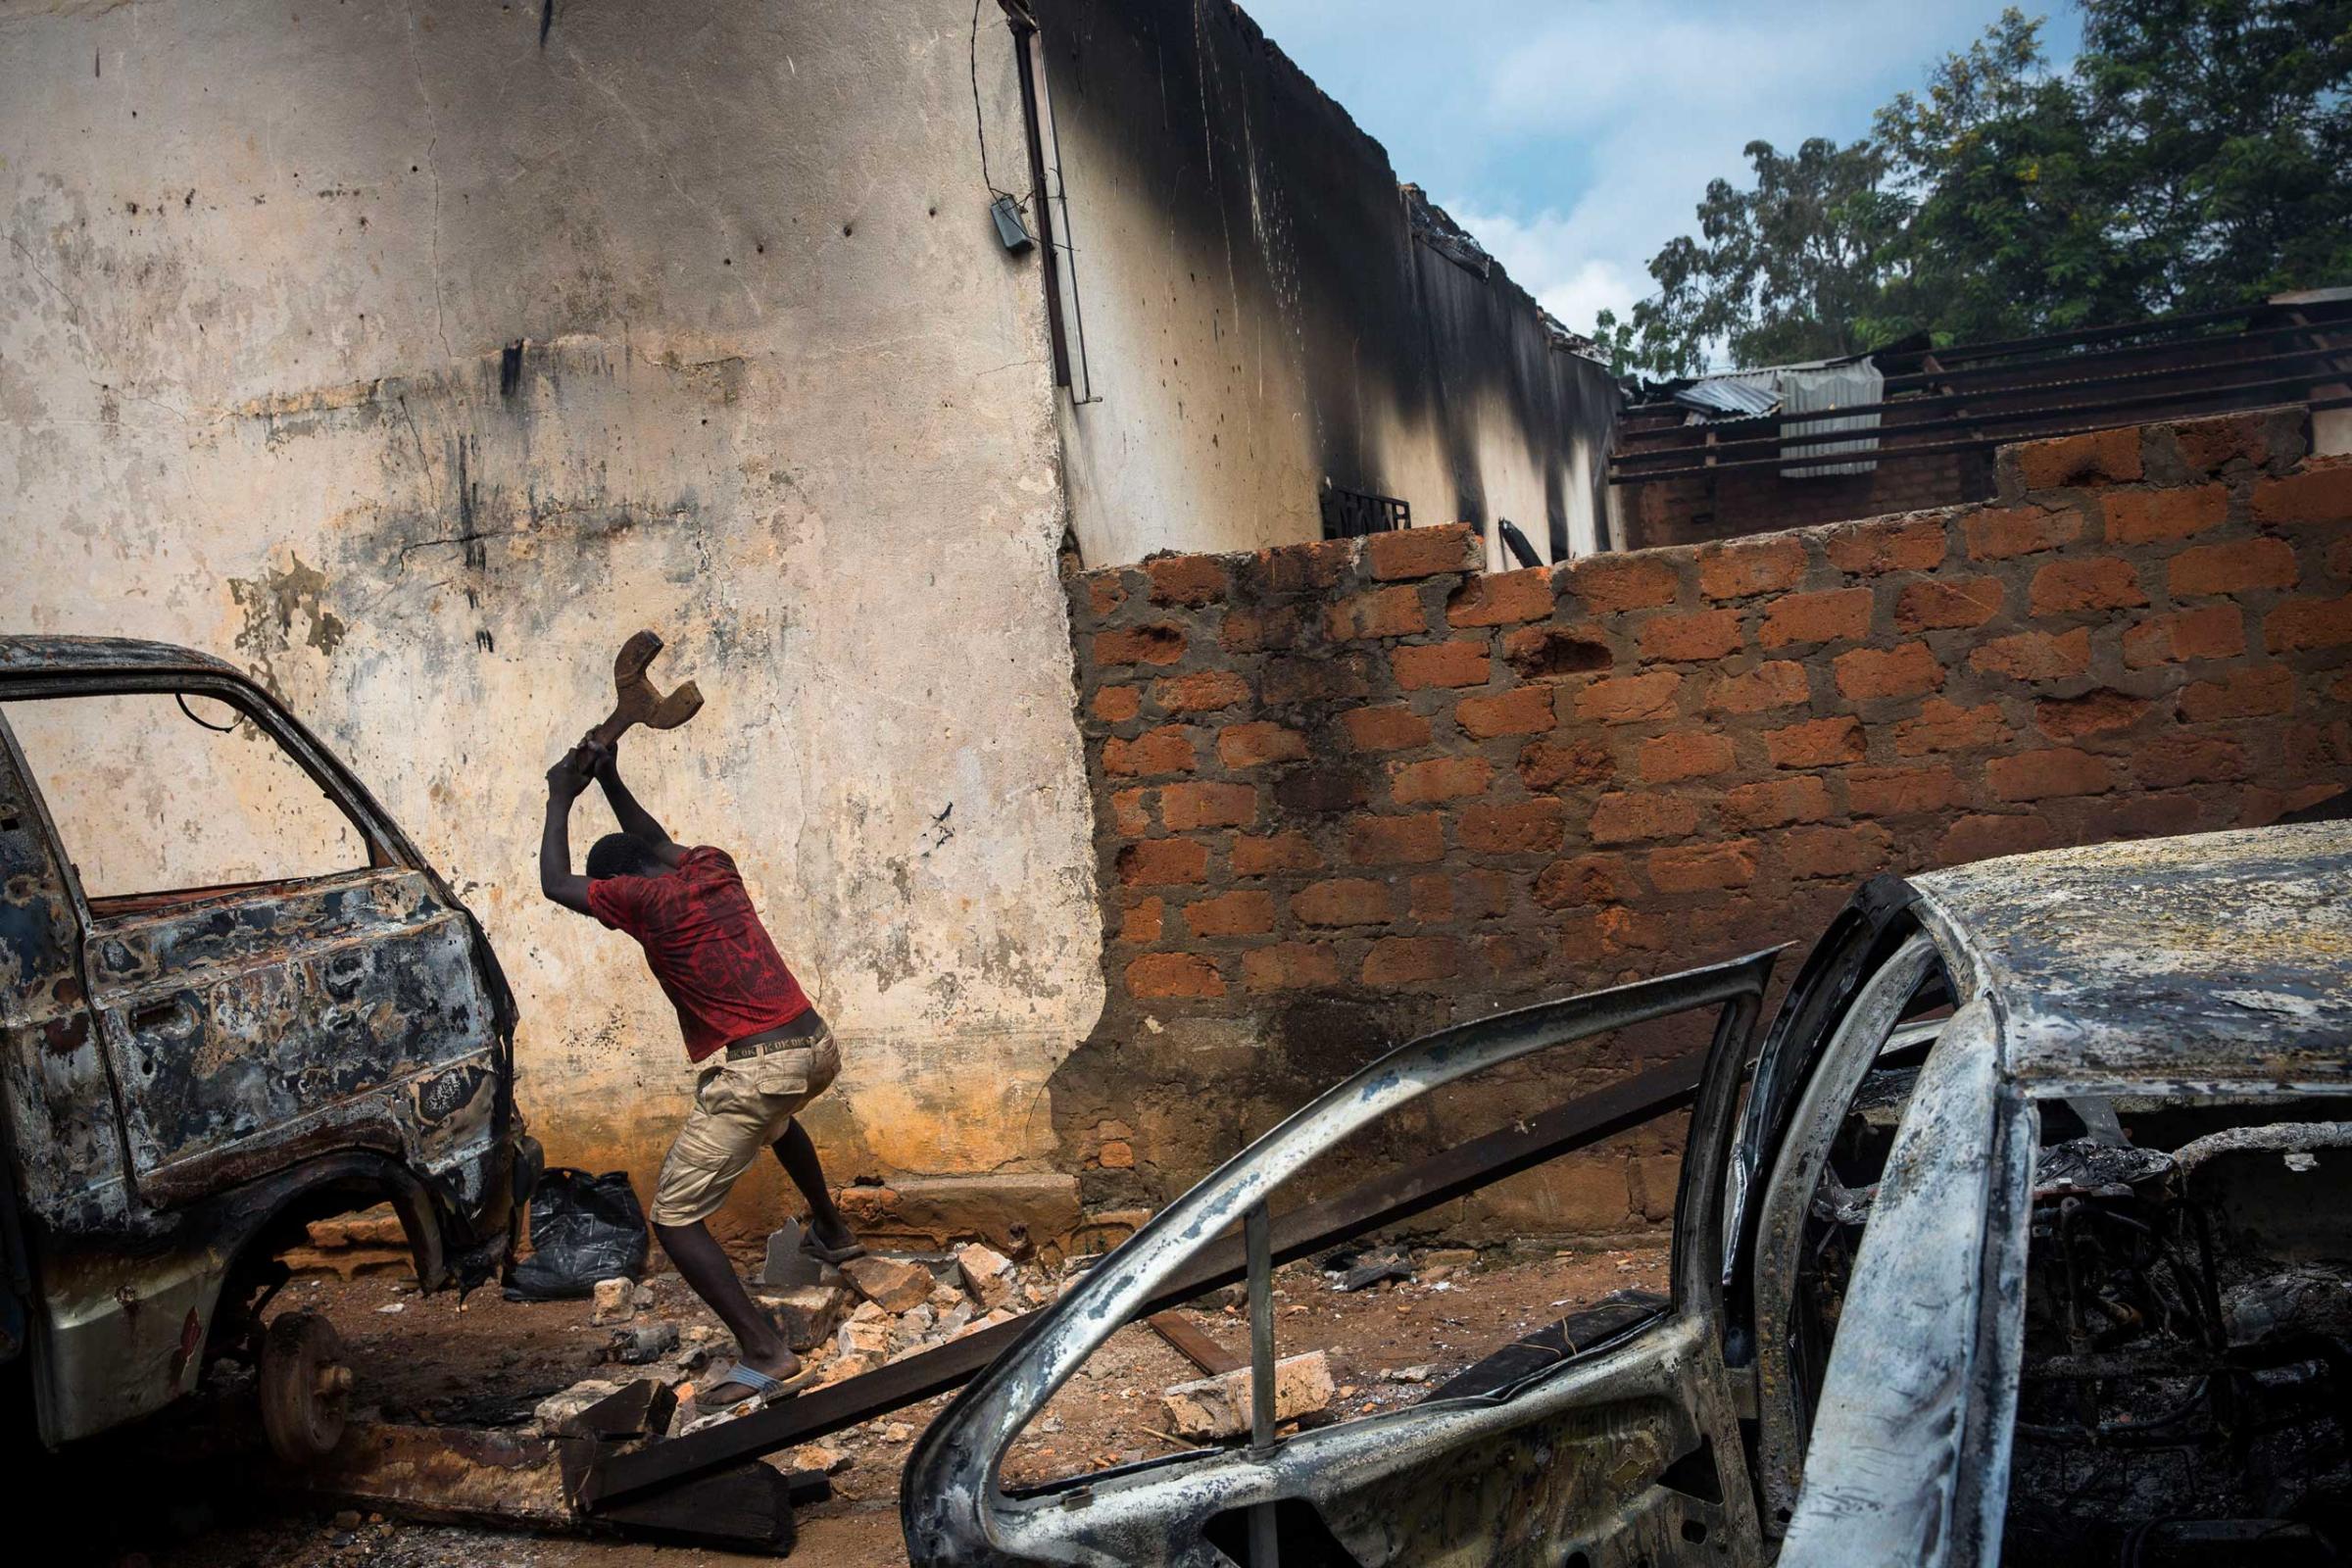 Central African Republic-Bangui-A Christian man is destroying burn out cars in rage, next to a looted mosque that was set on fire earlier, in the capital Bangui.